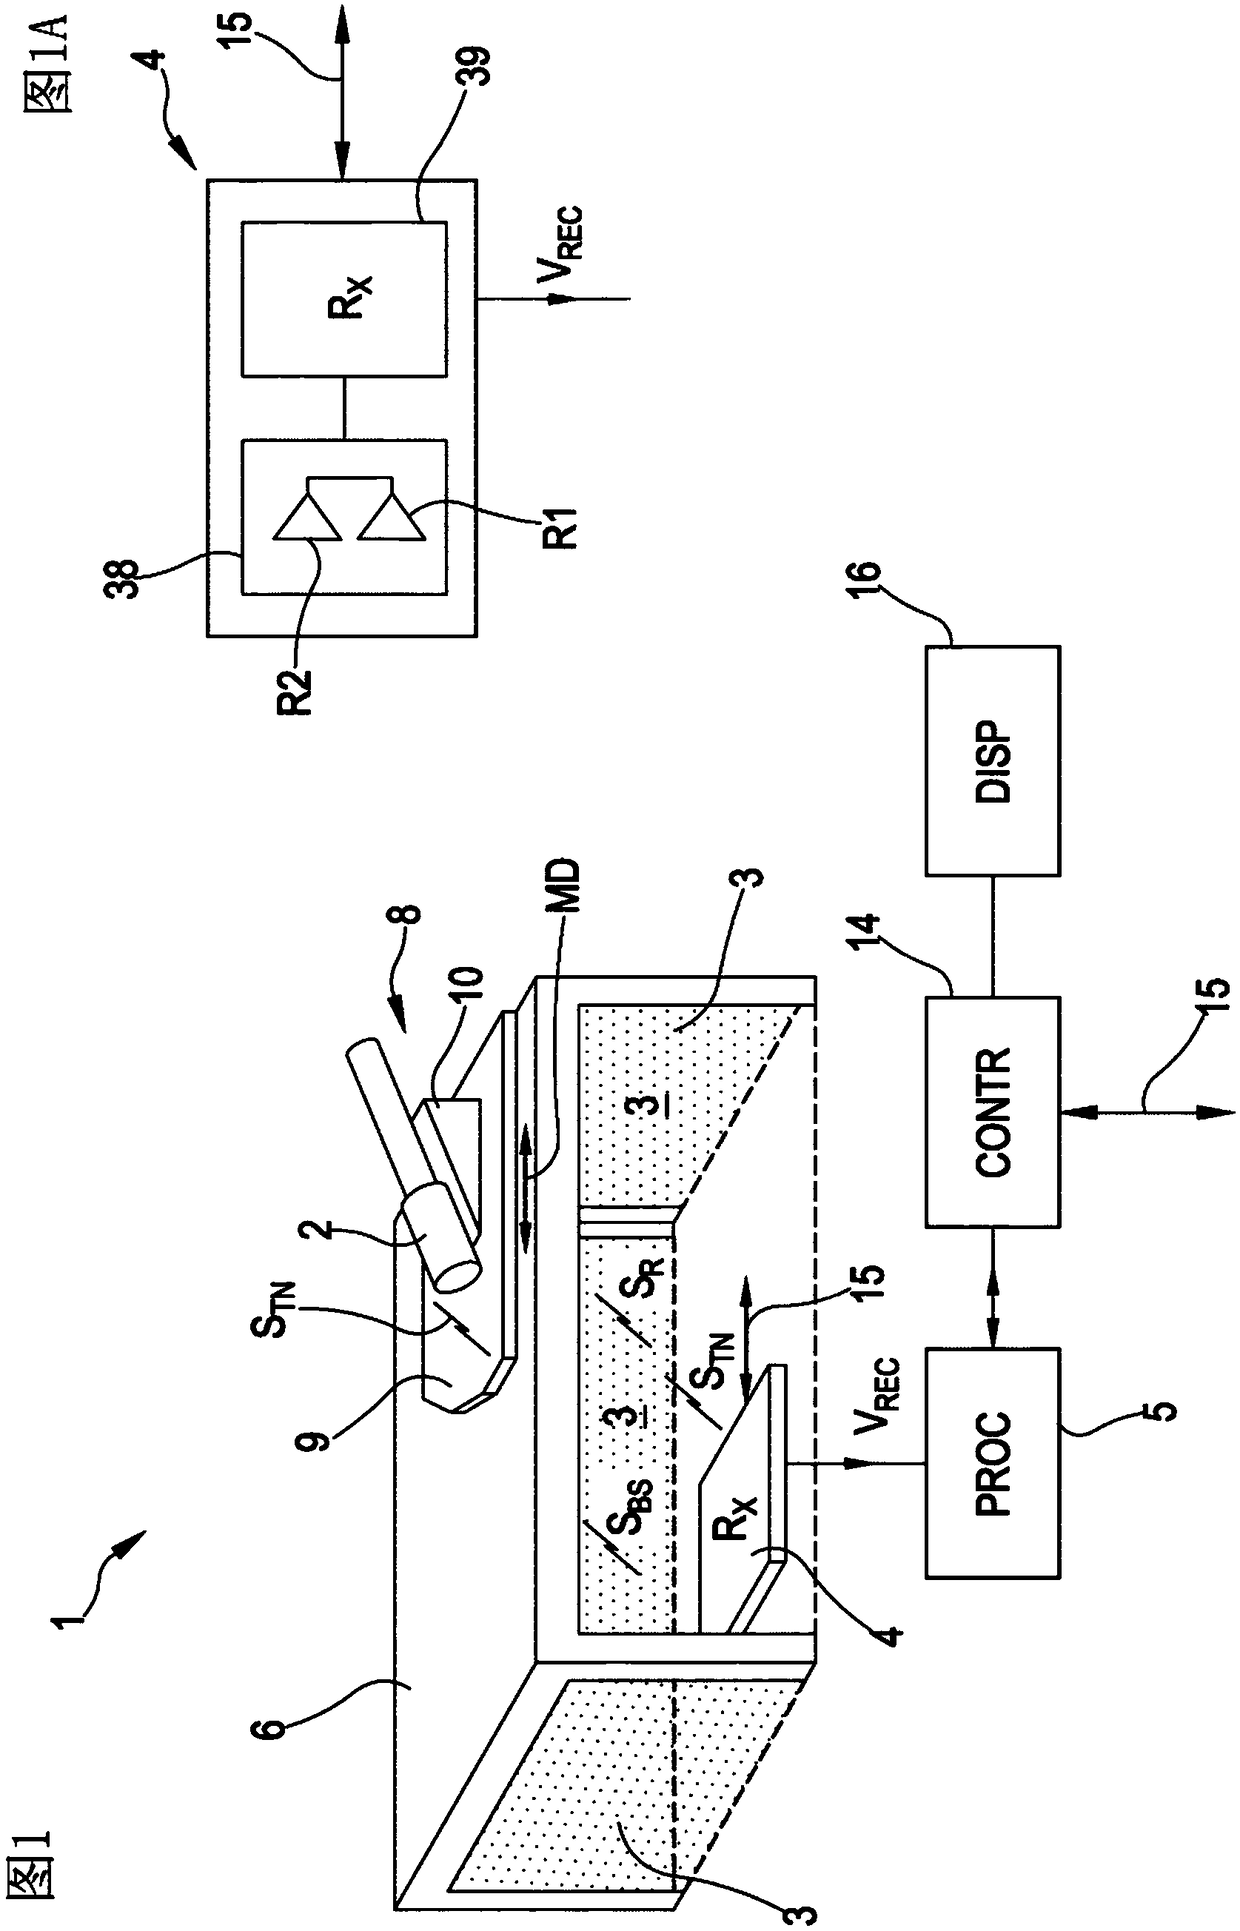 A tissue anomaly detection apparatus comprising a probe transmitter device